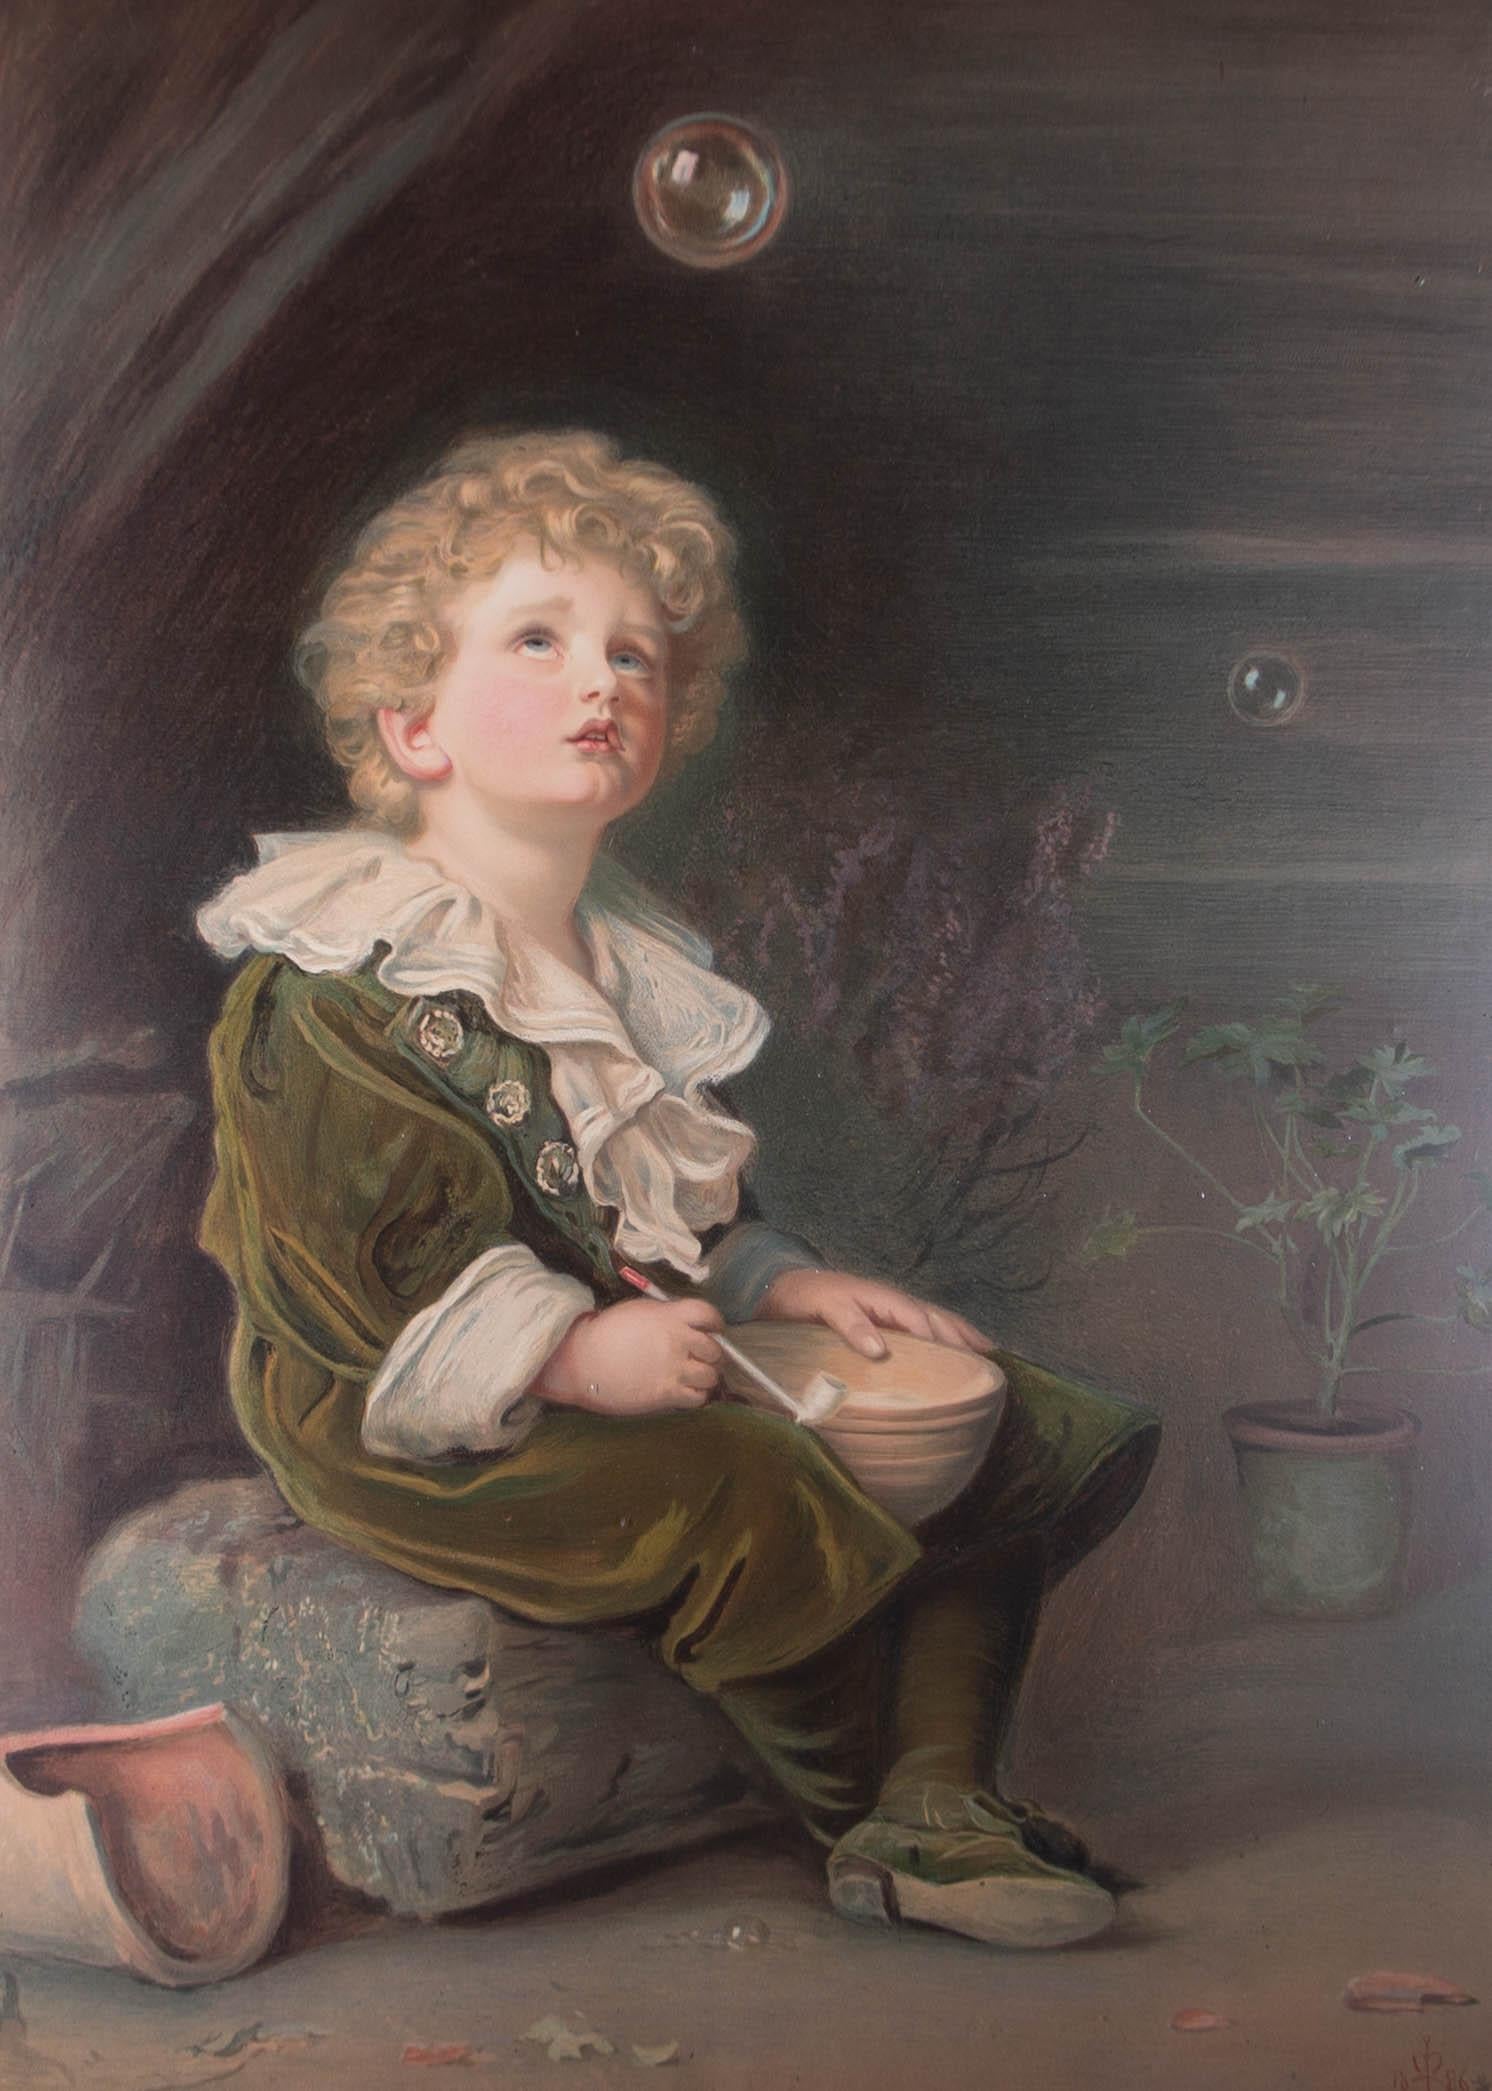 A chromolithograph of John Everett Millais's (1829-1896) painting 'Bubbles' (1886), originally titled 'A Child's World'. The image was most famously used in advertisements for Pears Soap. Presented in a white mount and an Aesthetic Movement frame